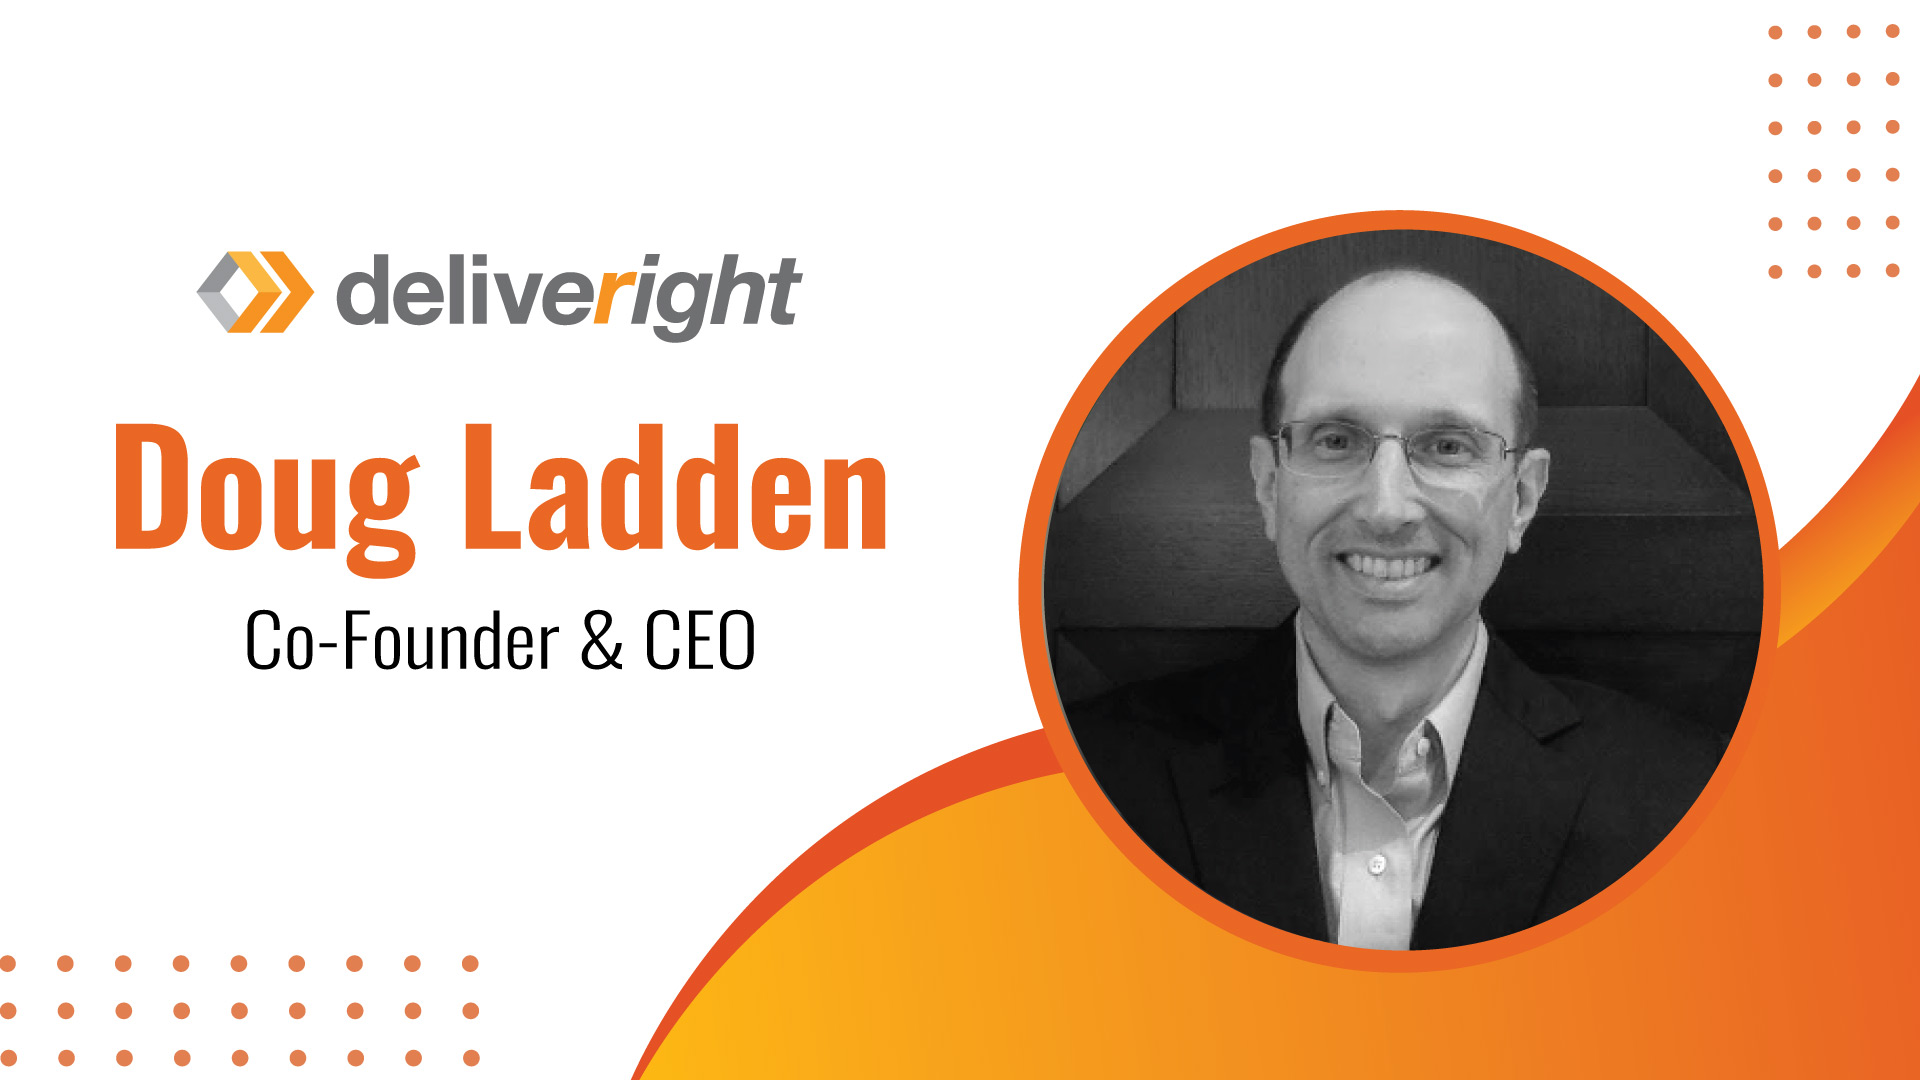 MarTech Edge Interview with Doug Ladden, Co-Founder & CEO, Deliveright